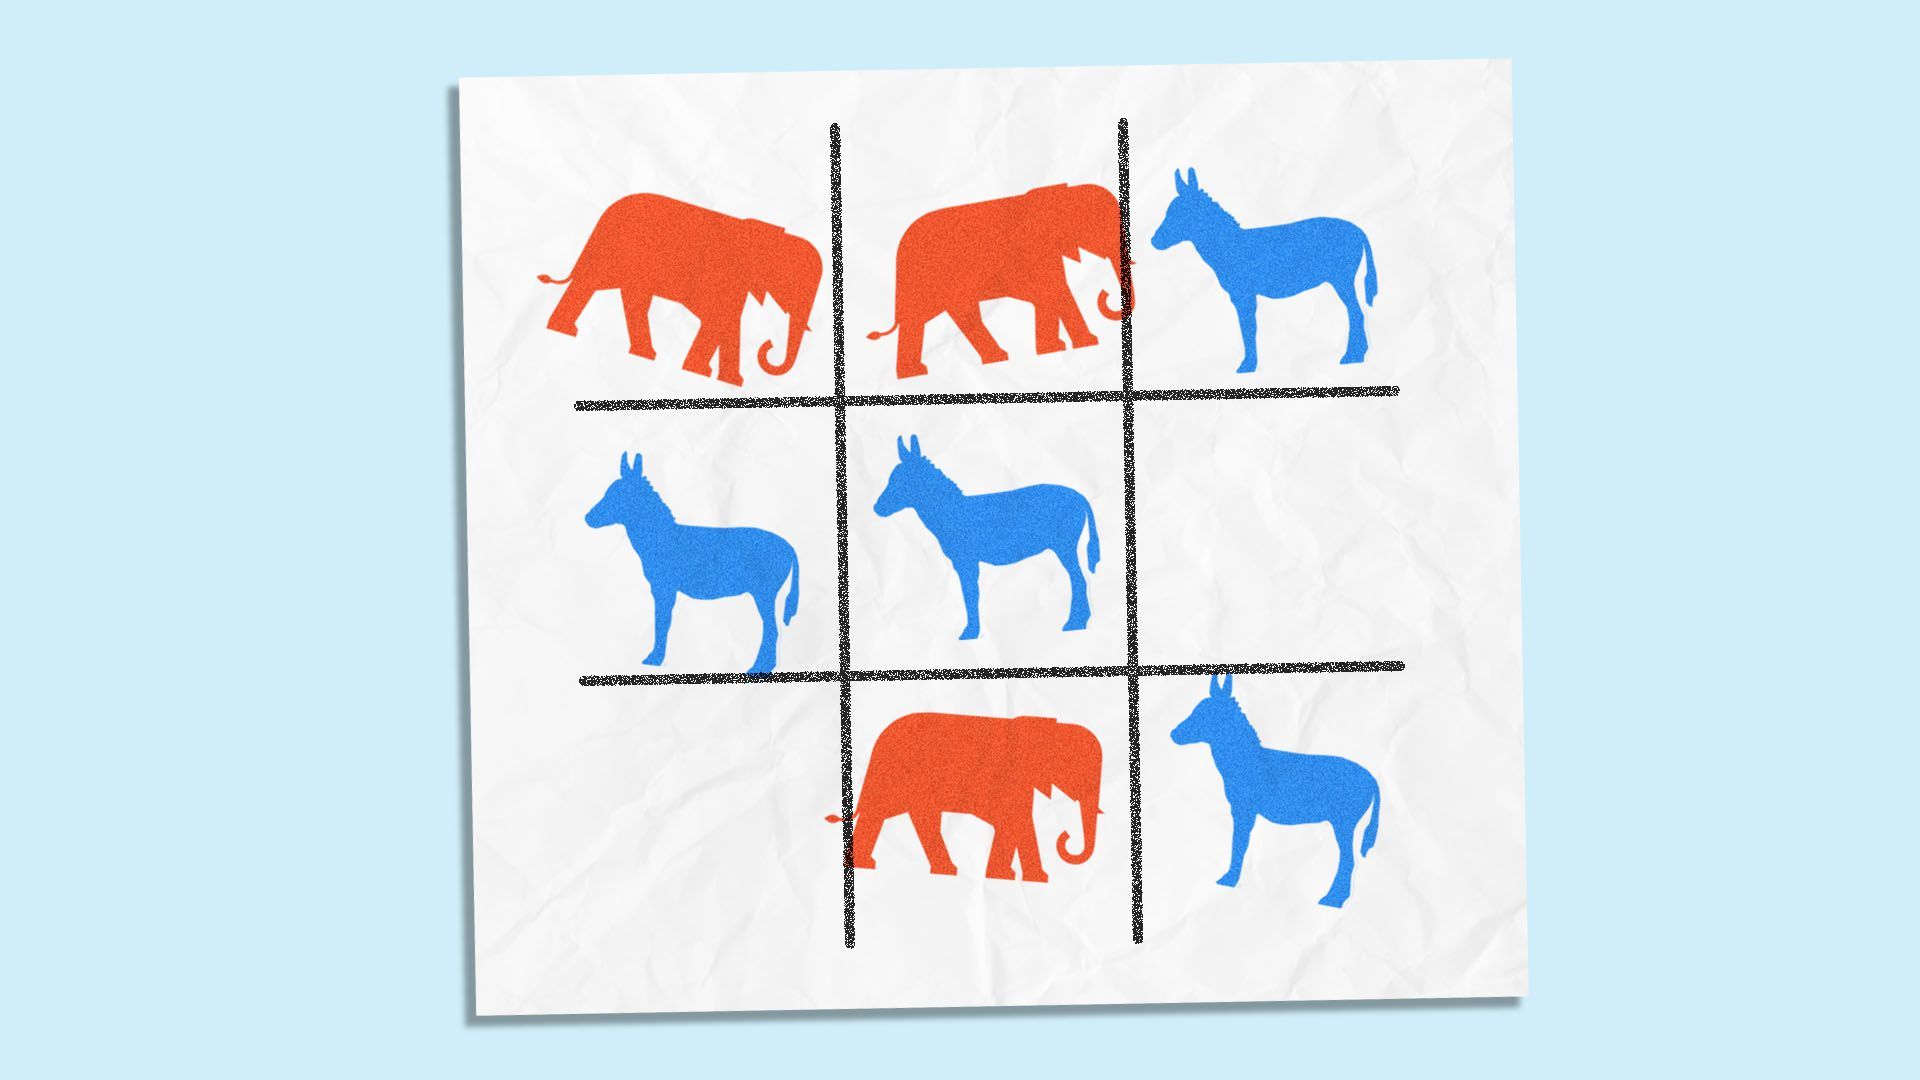 Illustration of a tic-tac-toe board filled with elephants and donkeys